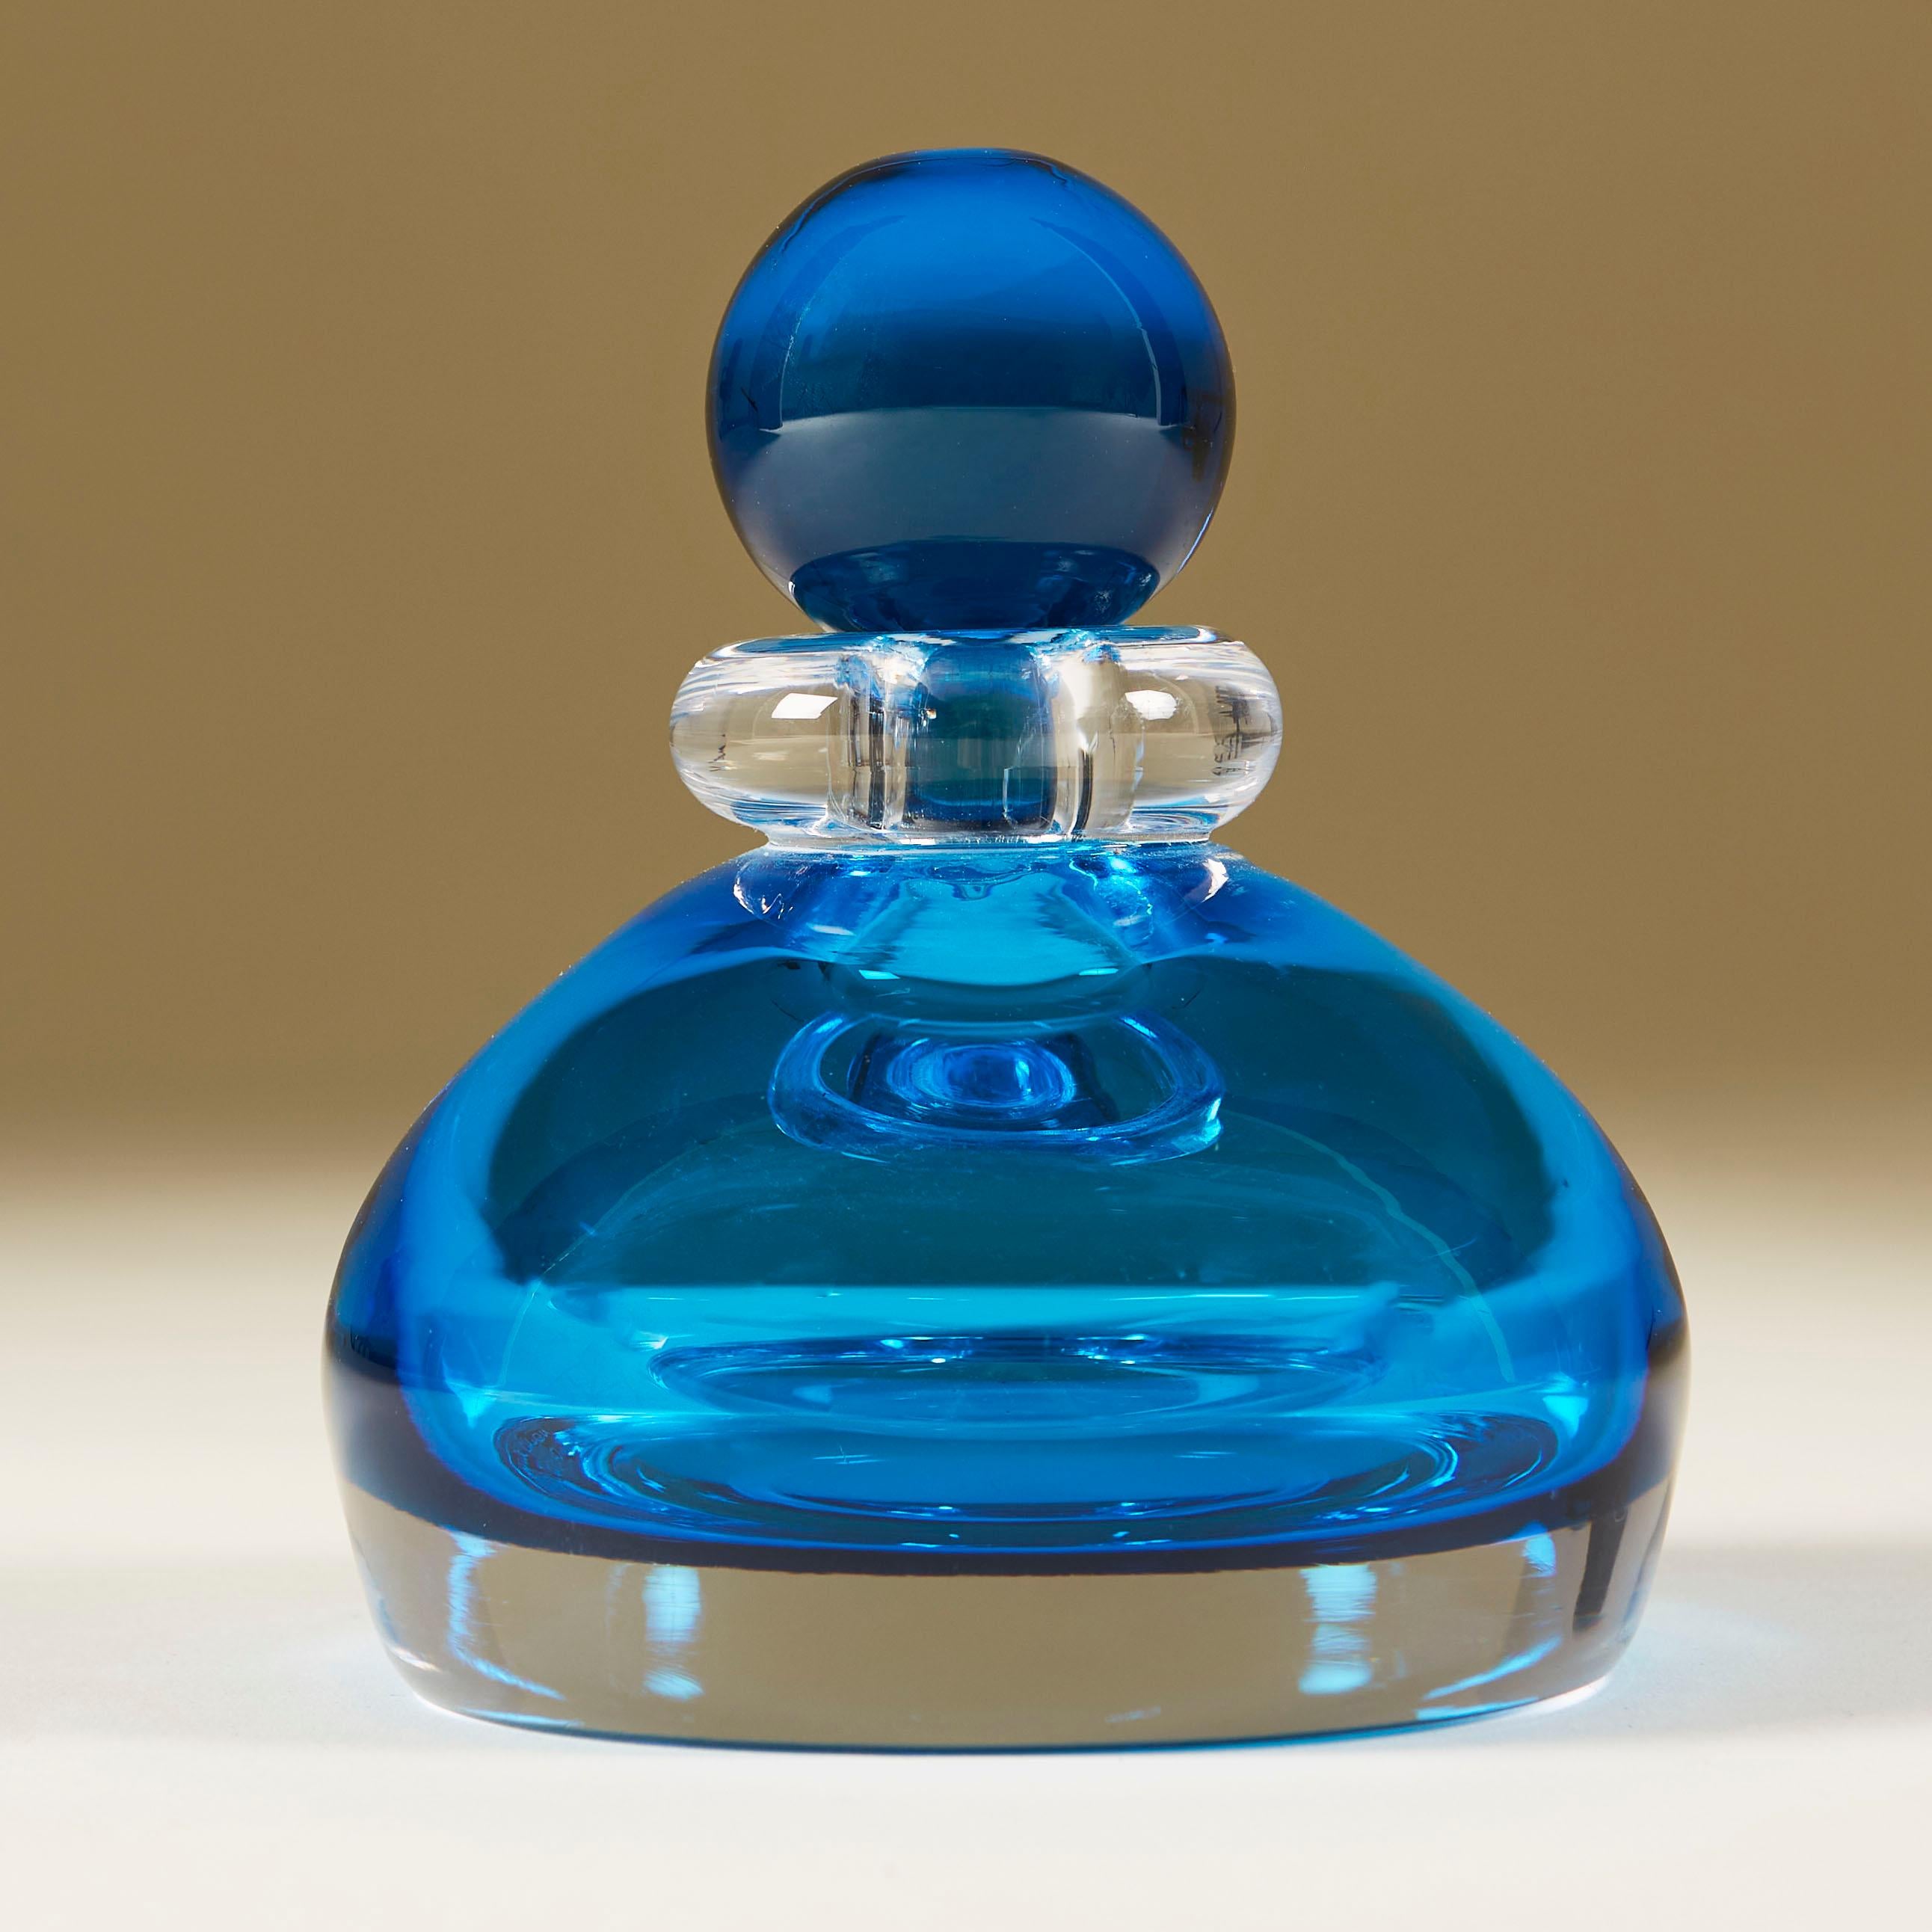 Rich aquamarine perfume bottle cased in clear Murano glass with clear glass collar and aqua marine ball stopper.